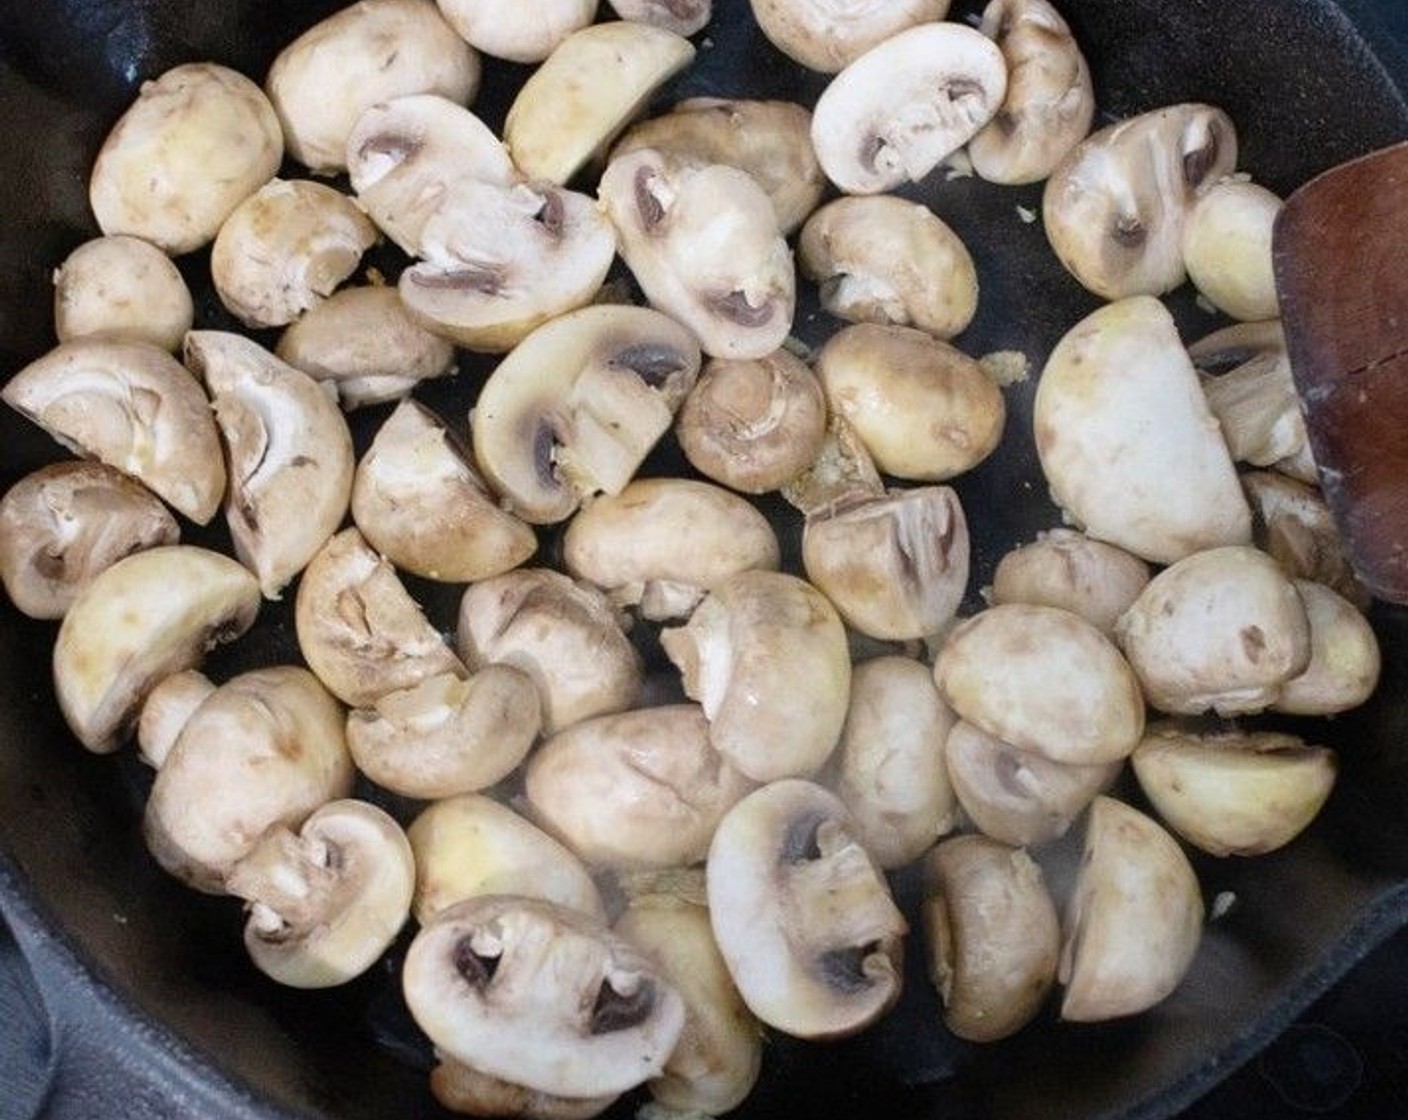 step 2 Add the White Mushrooms (3 cups) and stir-fry for 2-3 minutes.